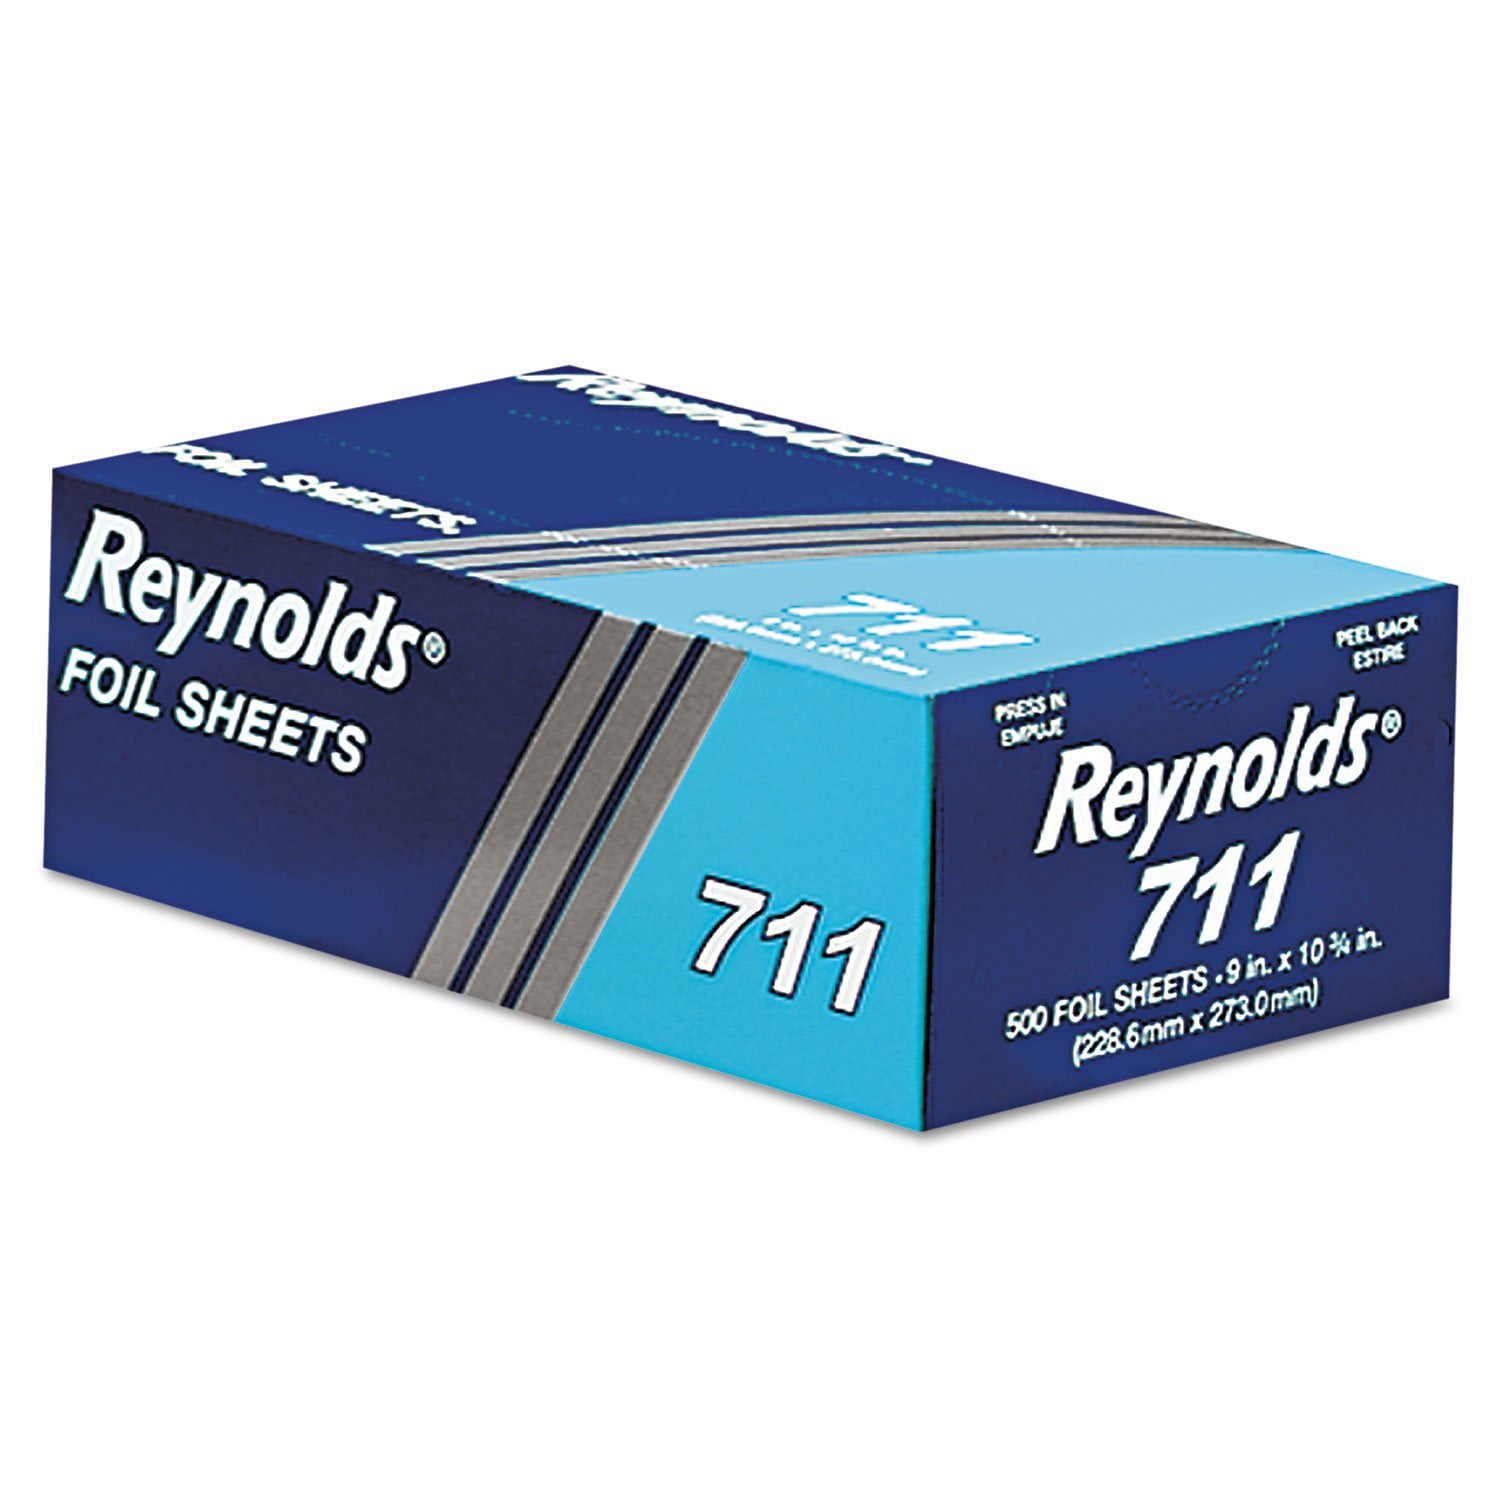 Pre-Cut Pop up Wrappers, 500 Count Reynolds Foodservice Foil Sheets 